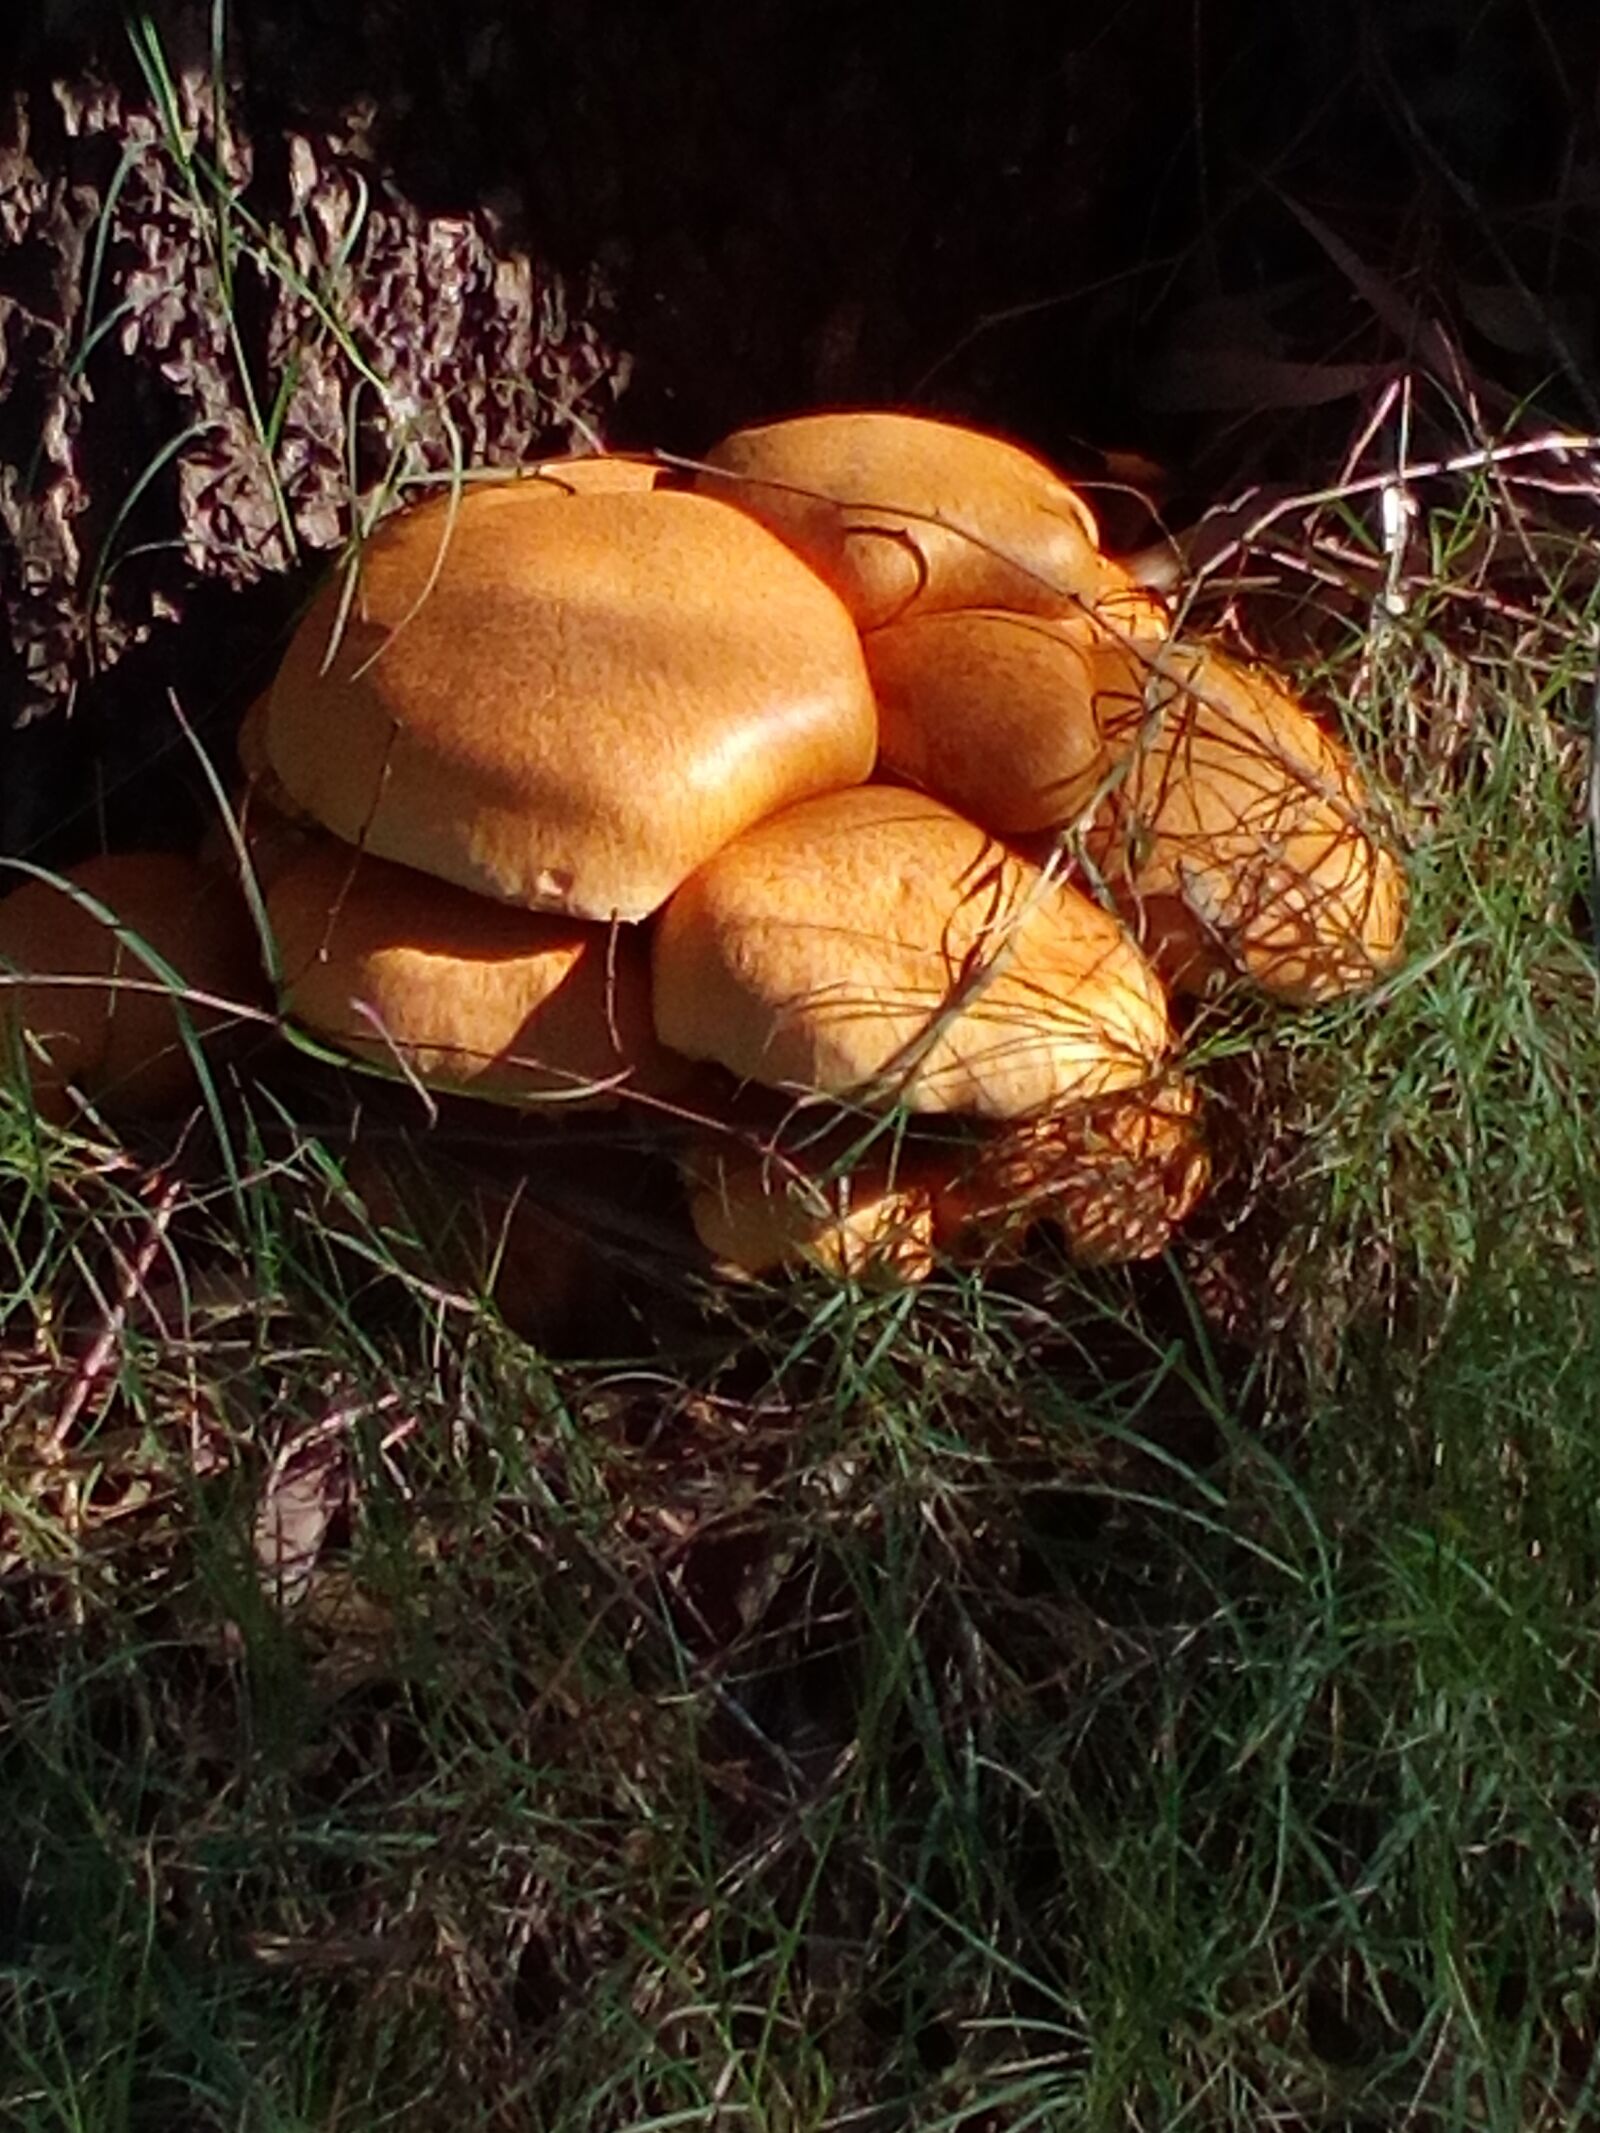 HUAWEI Y6 Elite sample photo. Fungi found in perth photography